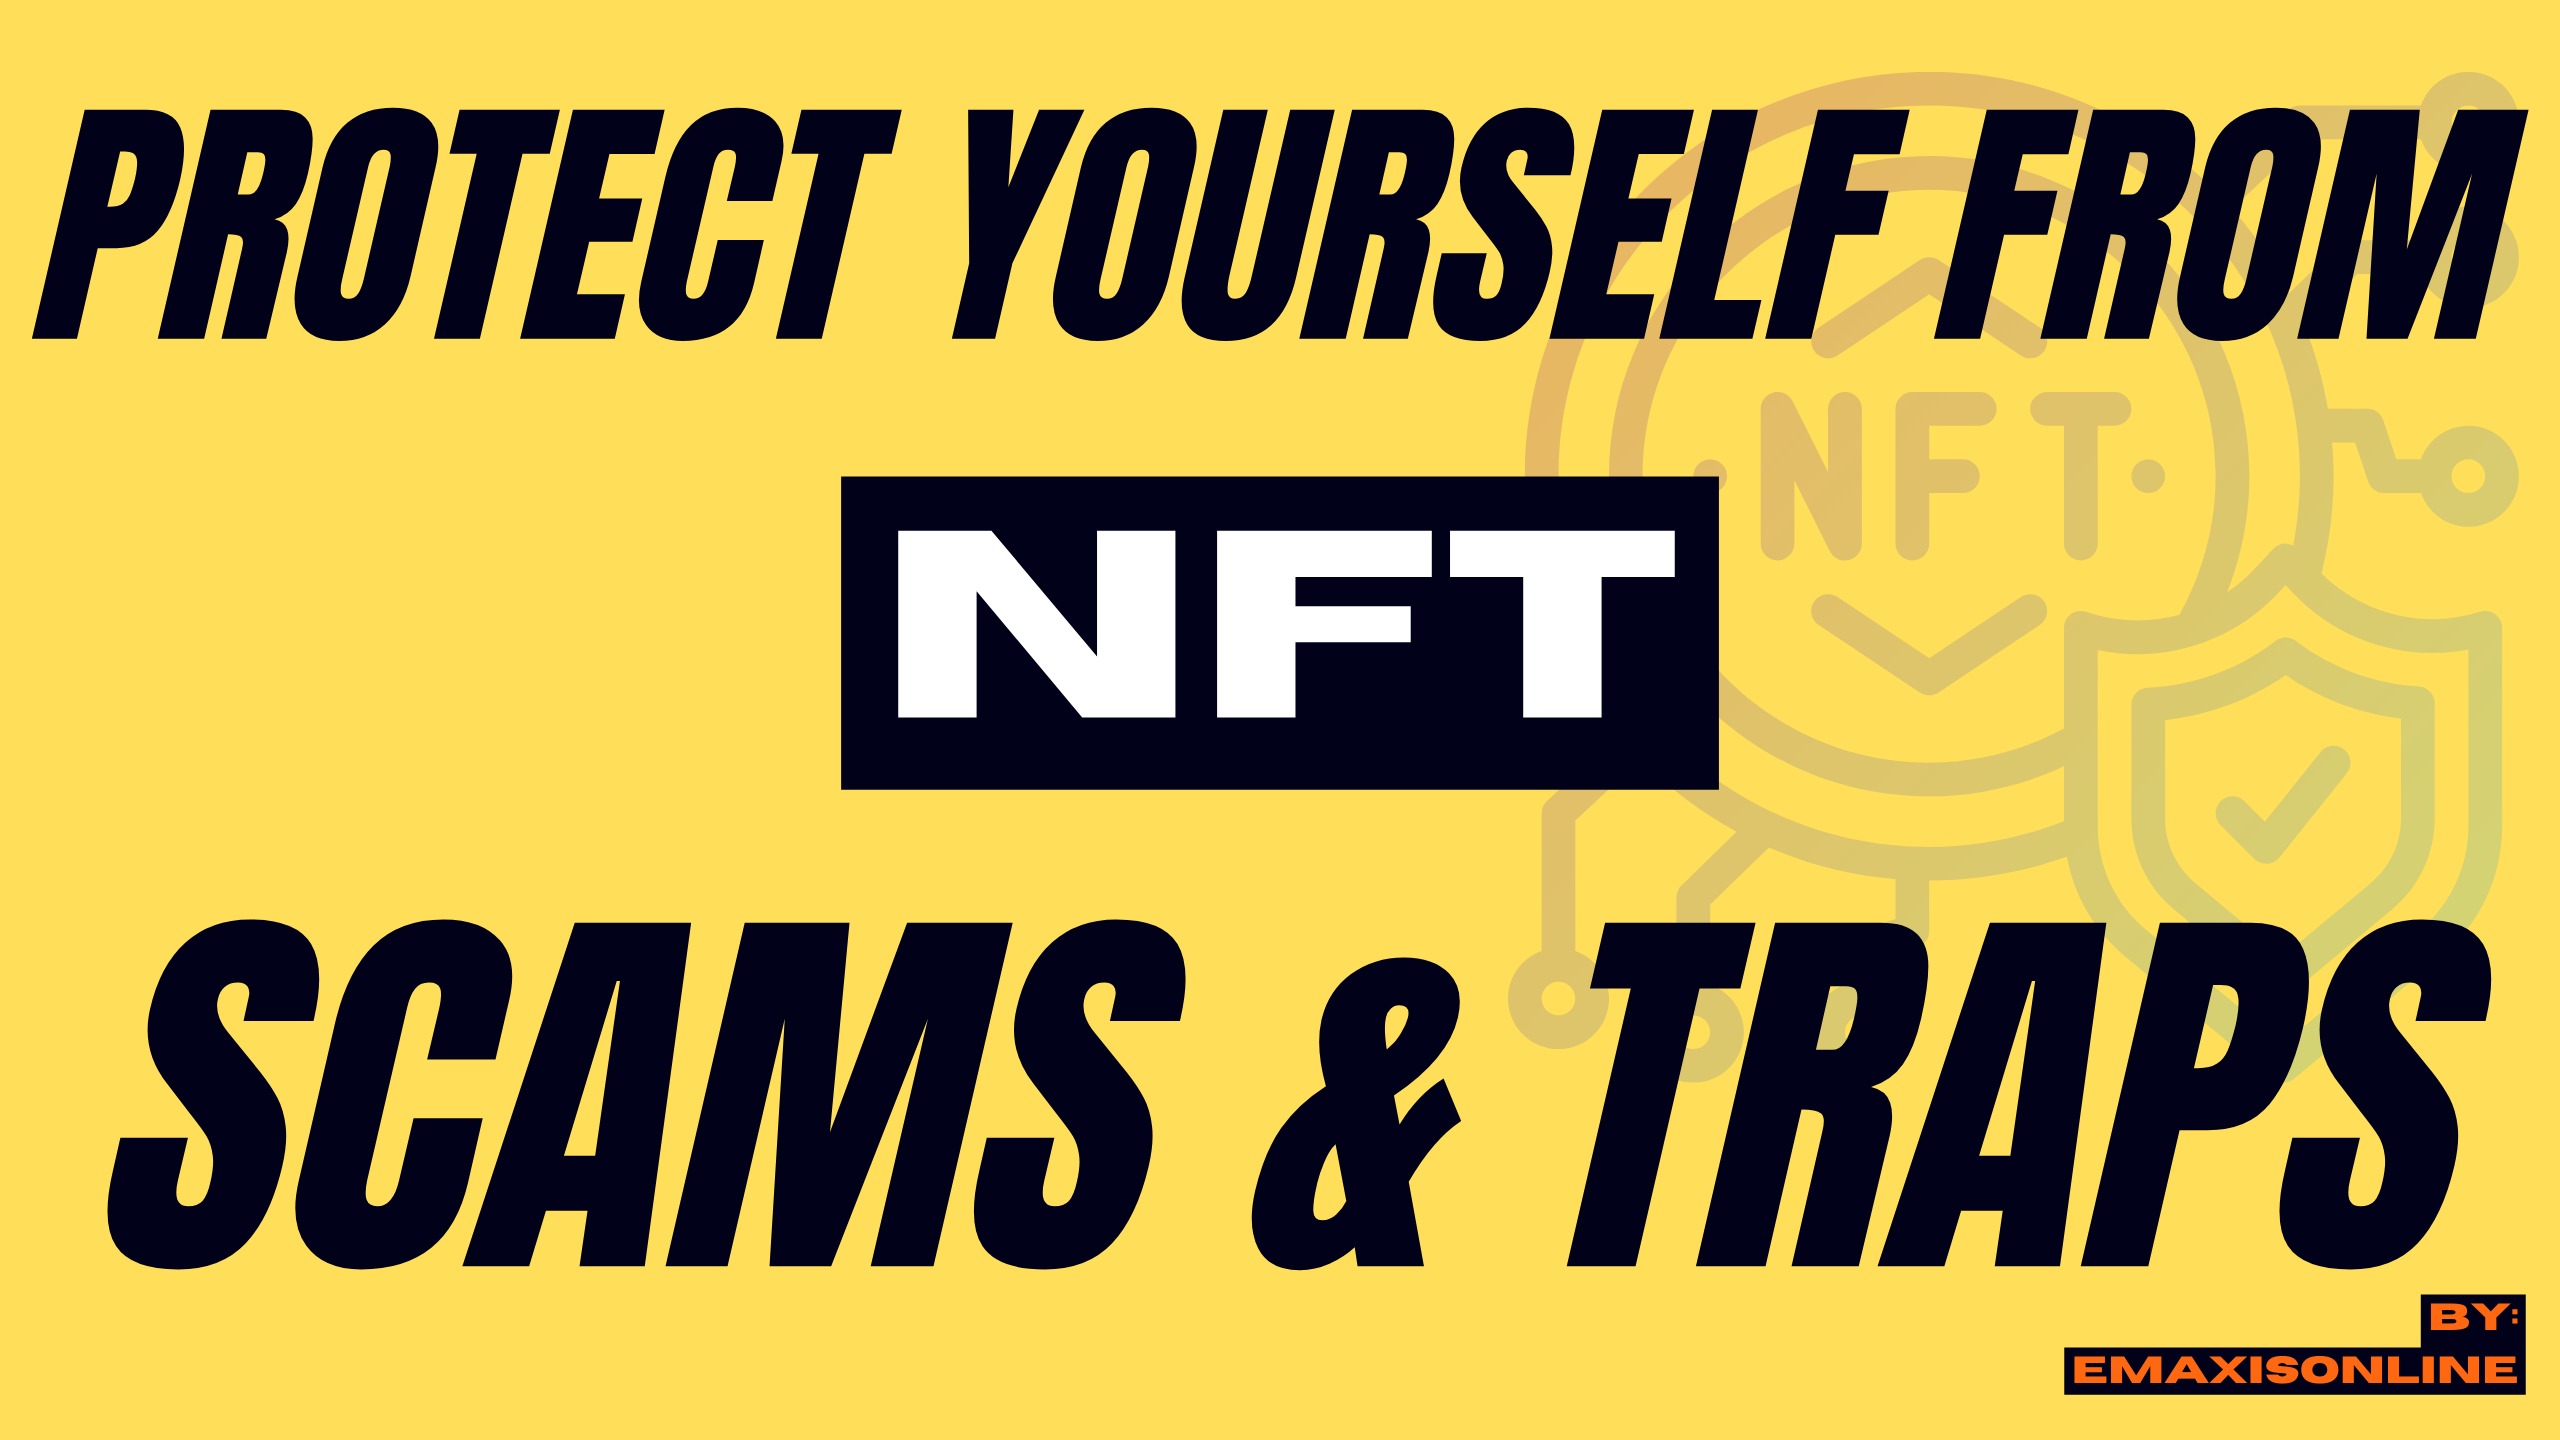 @emaxisonline/protect-yourself-from-these-nft-scams-and-traps